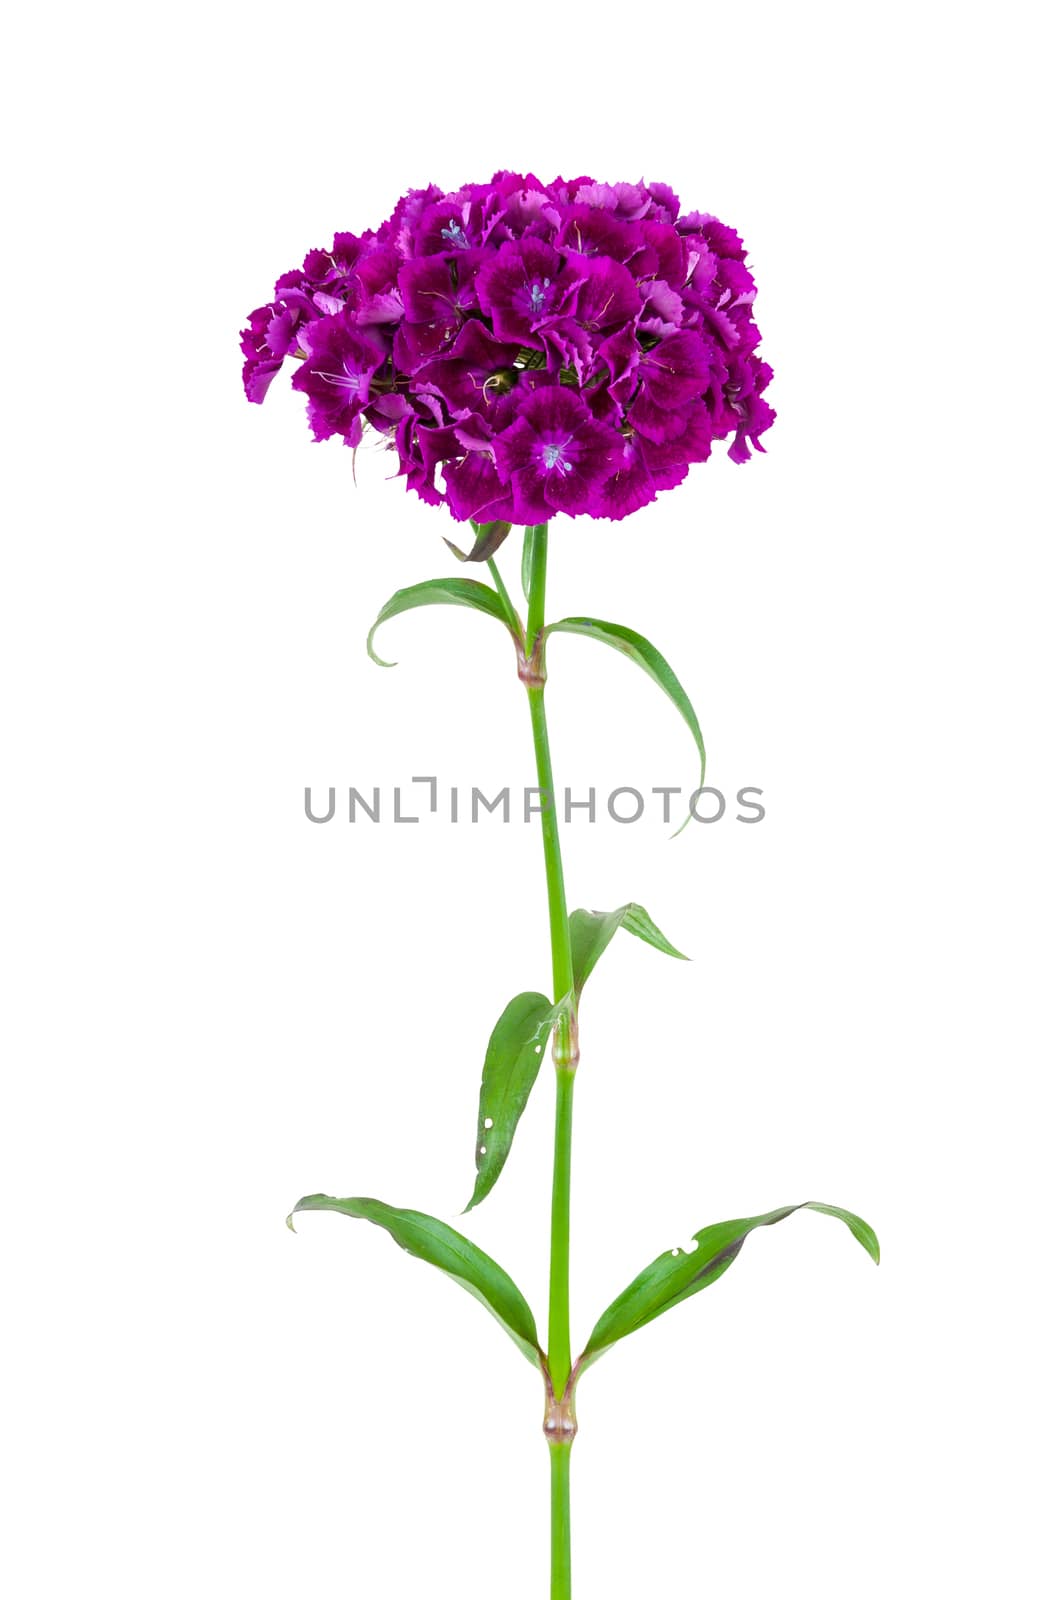 Dianthus barbatus, sweet william, flower isolated on white background with clipping path